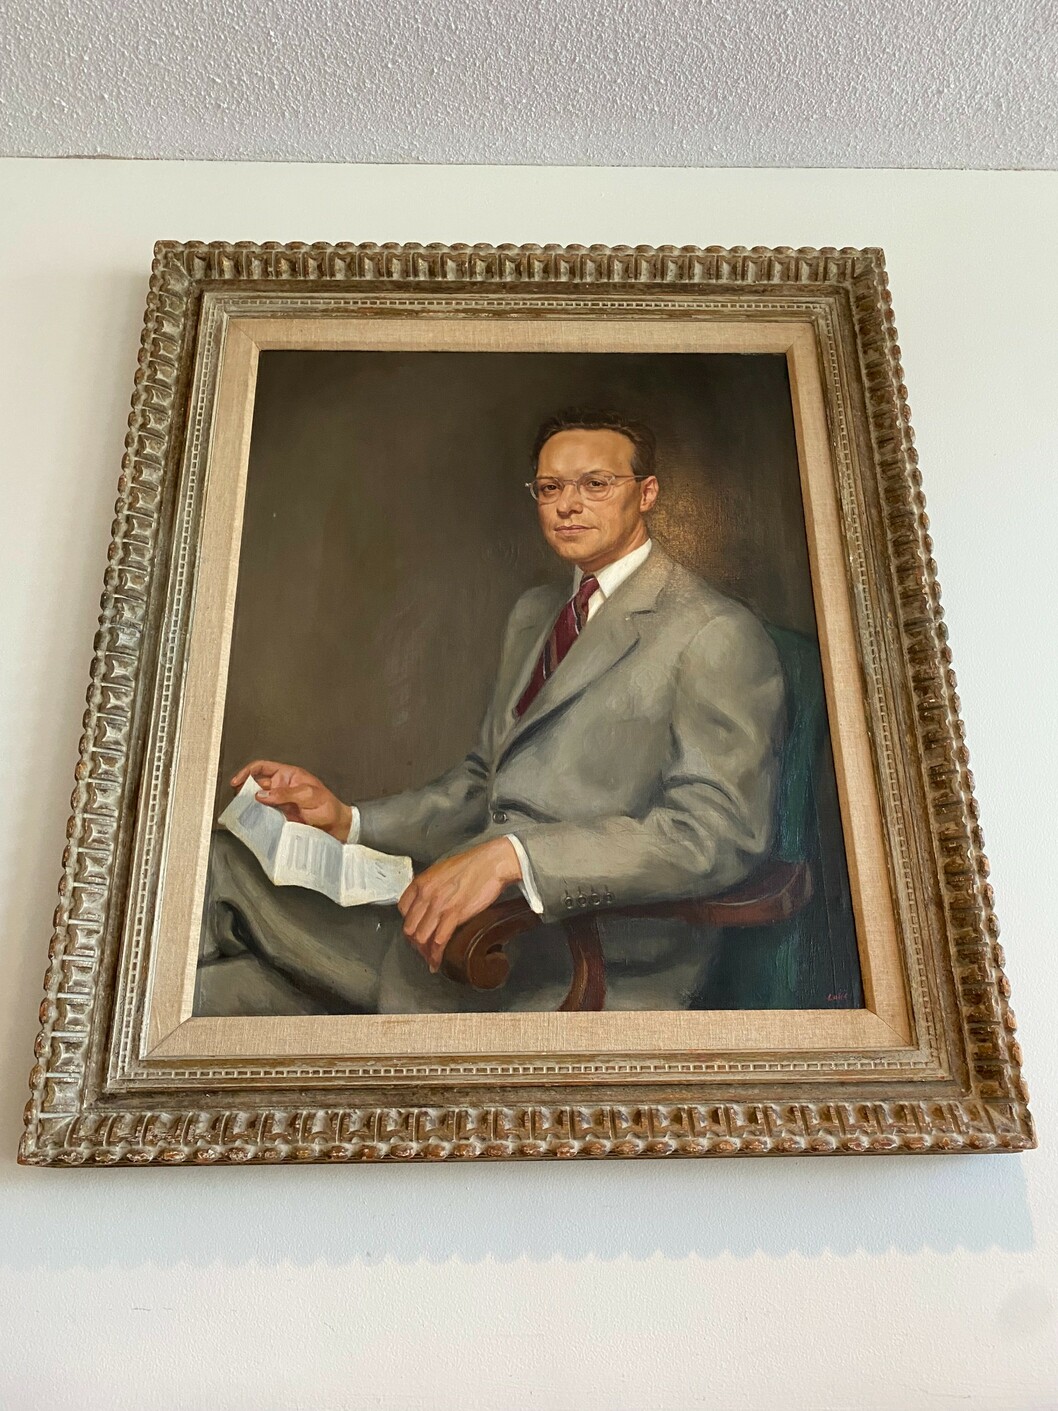  Portrait of Abraham H. Feller, UNNY059G, 1953, Friends and Colleagues of Mr. Feller